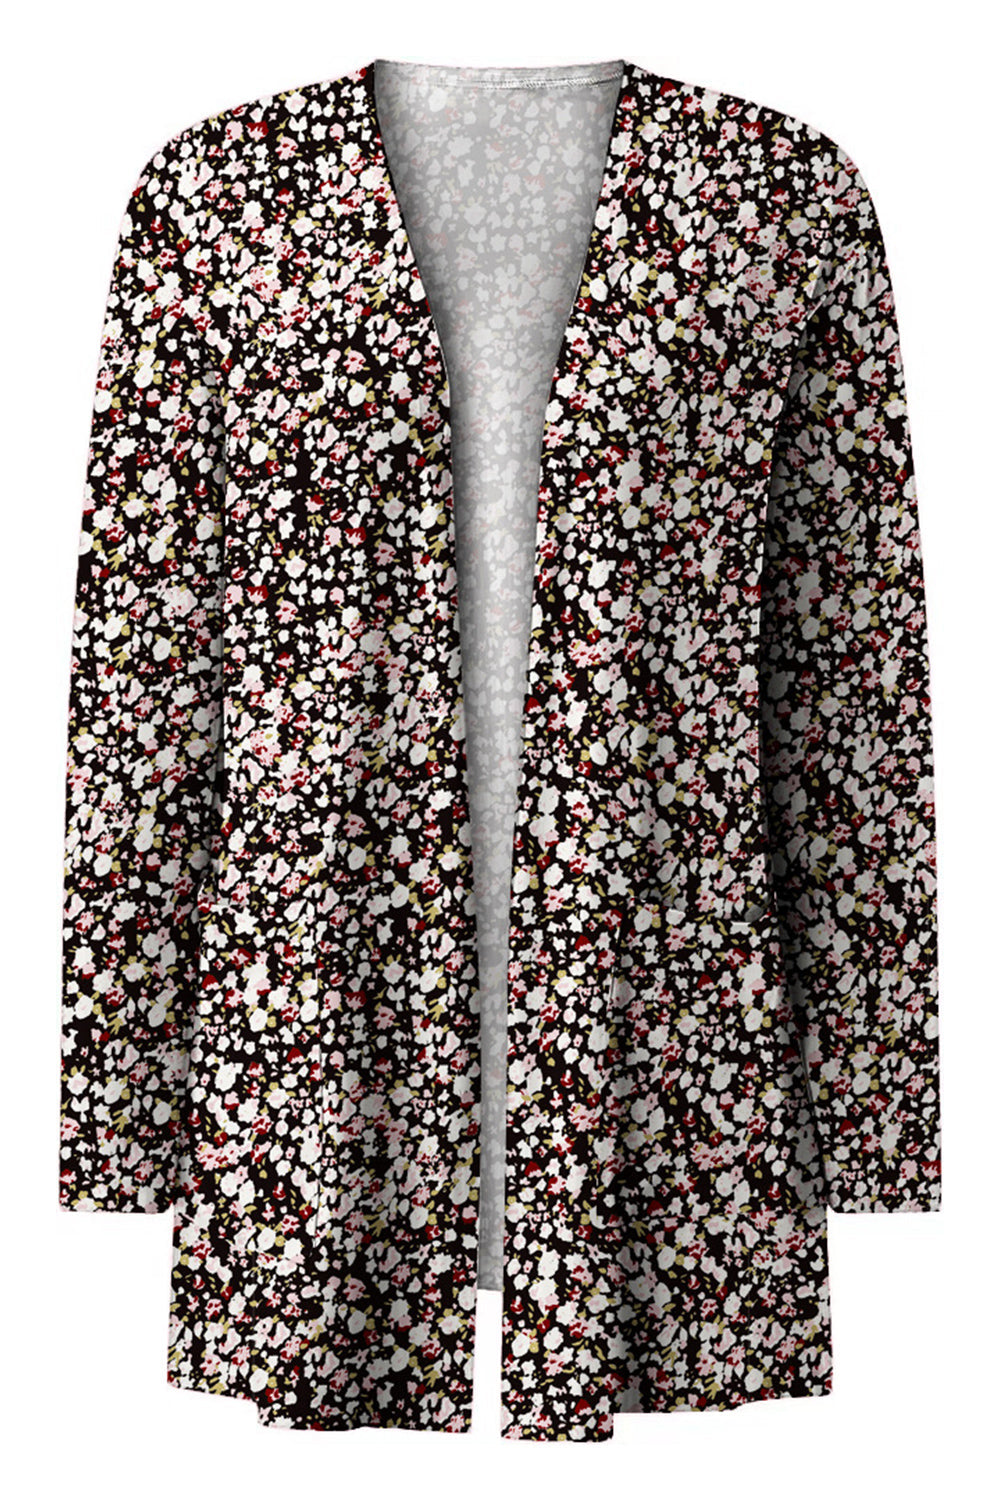 Printed Long Sleeve Cardigan - Women’s Clothing & Accessories - Shirts & Tops - 9 - 2024